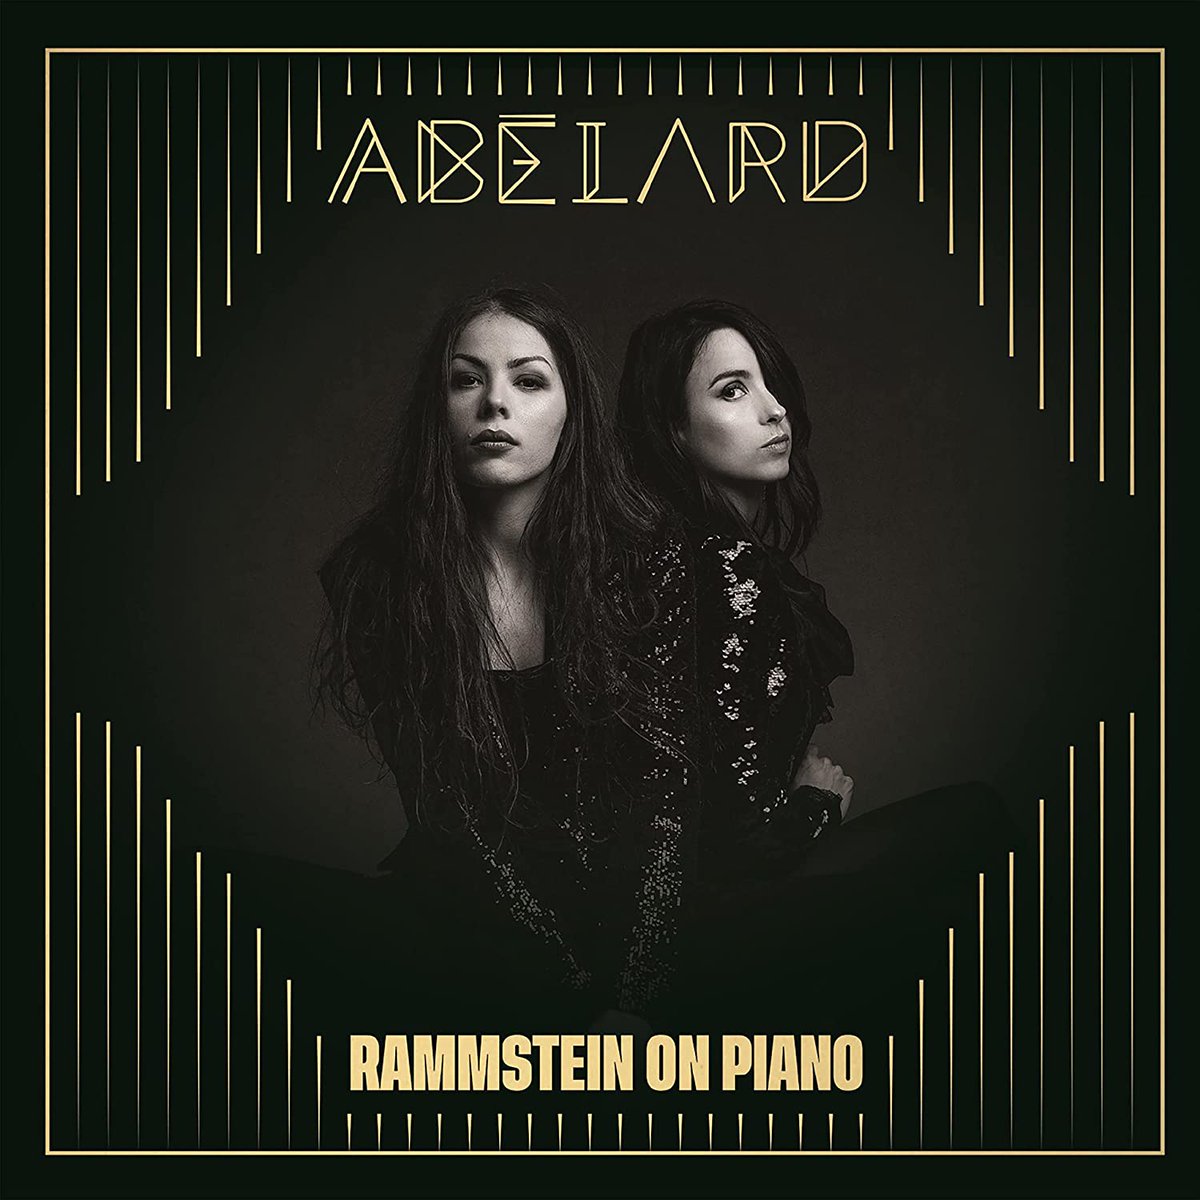 Abelard, the French female support act for the 2023 #Rammstein Stadium Tour, are releasing their first album titled 'Rammstein On Piano', which will be released on 09.06.23 The first single will be released 19.05.23 Pre-order: fnac.com/a18165135/Coll… amazon.fr/Rammstein-Pian…